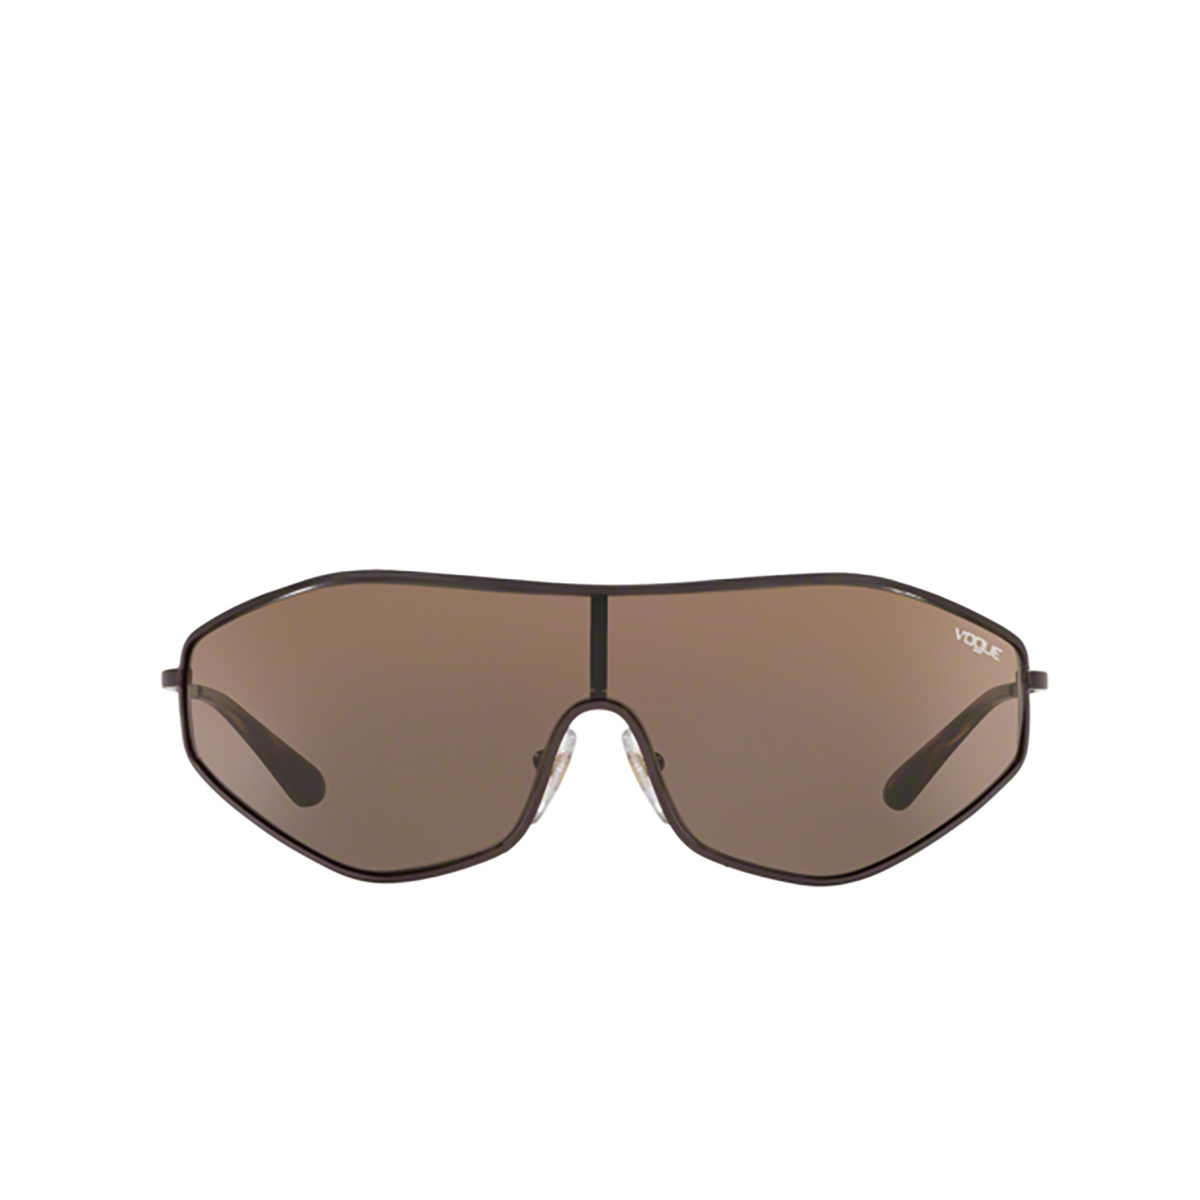 Vogue G-VISION Sunglasses 997/73 Brown - front view